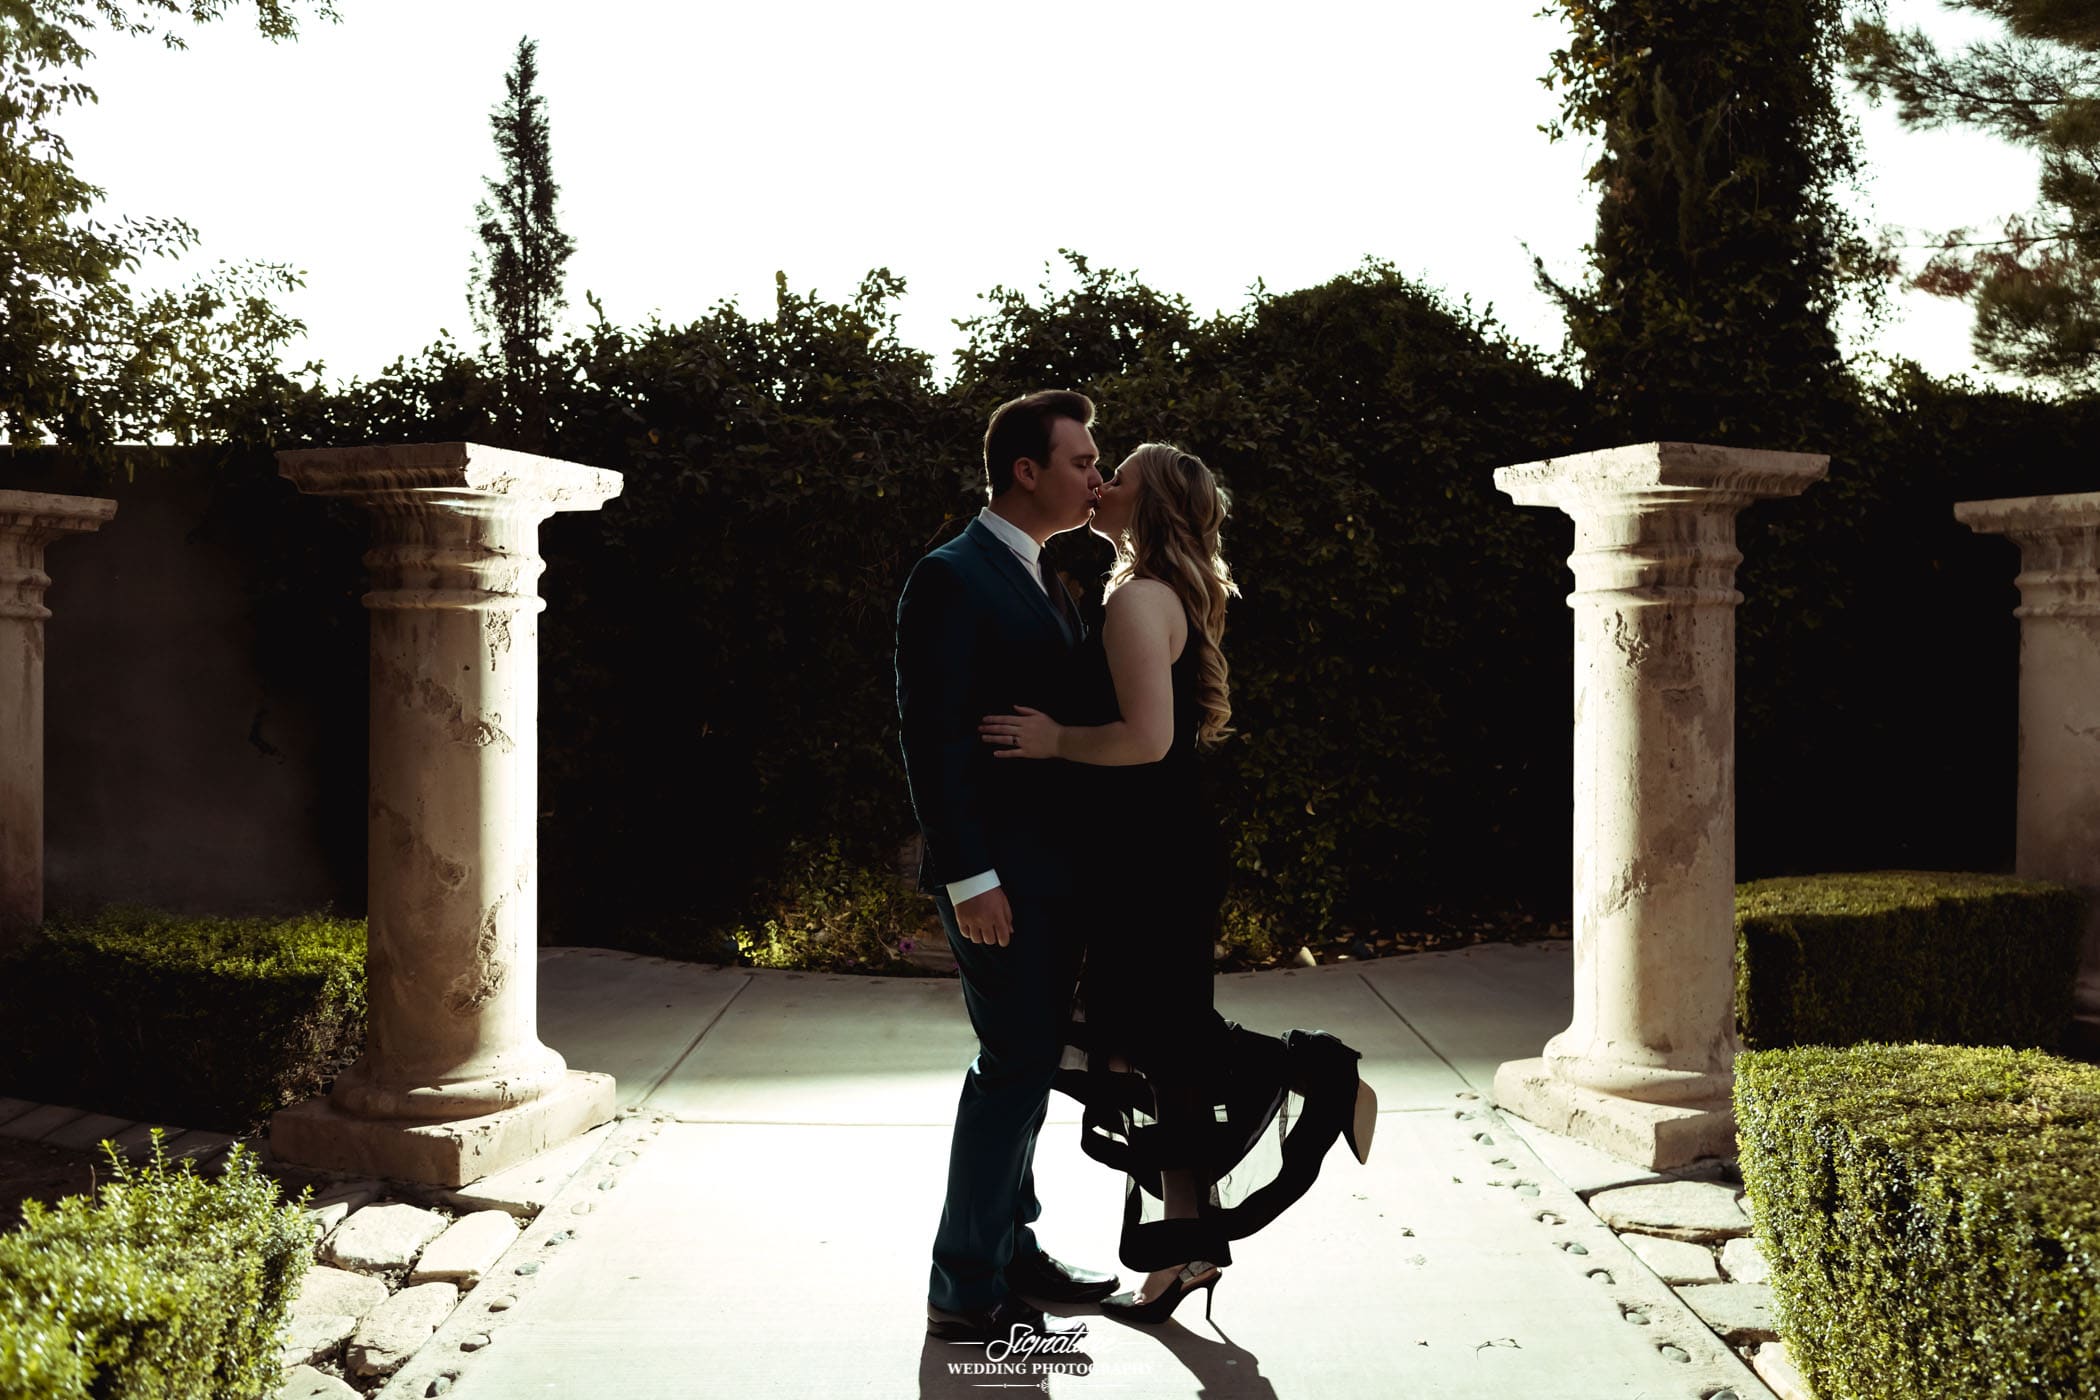 Couple kissing outside with pillars